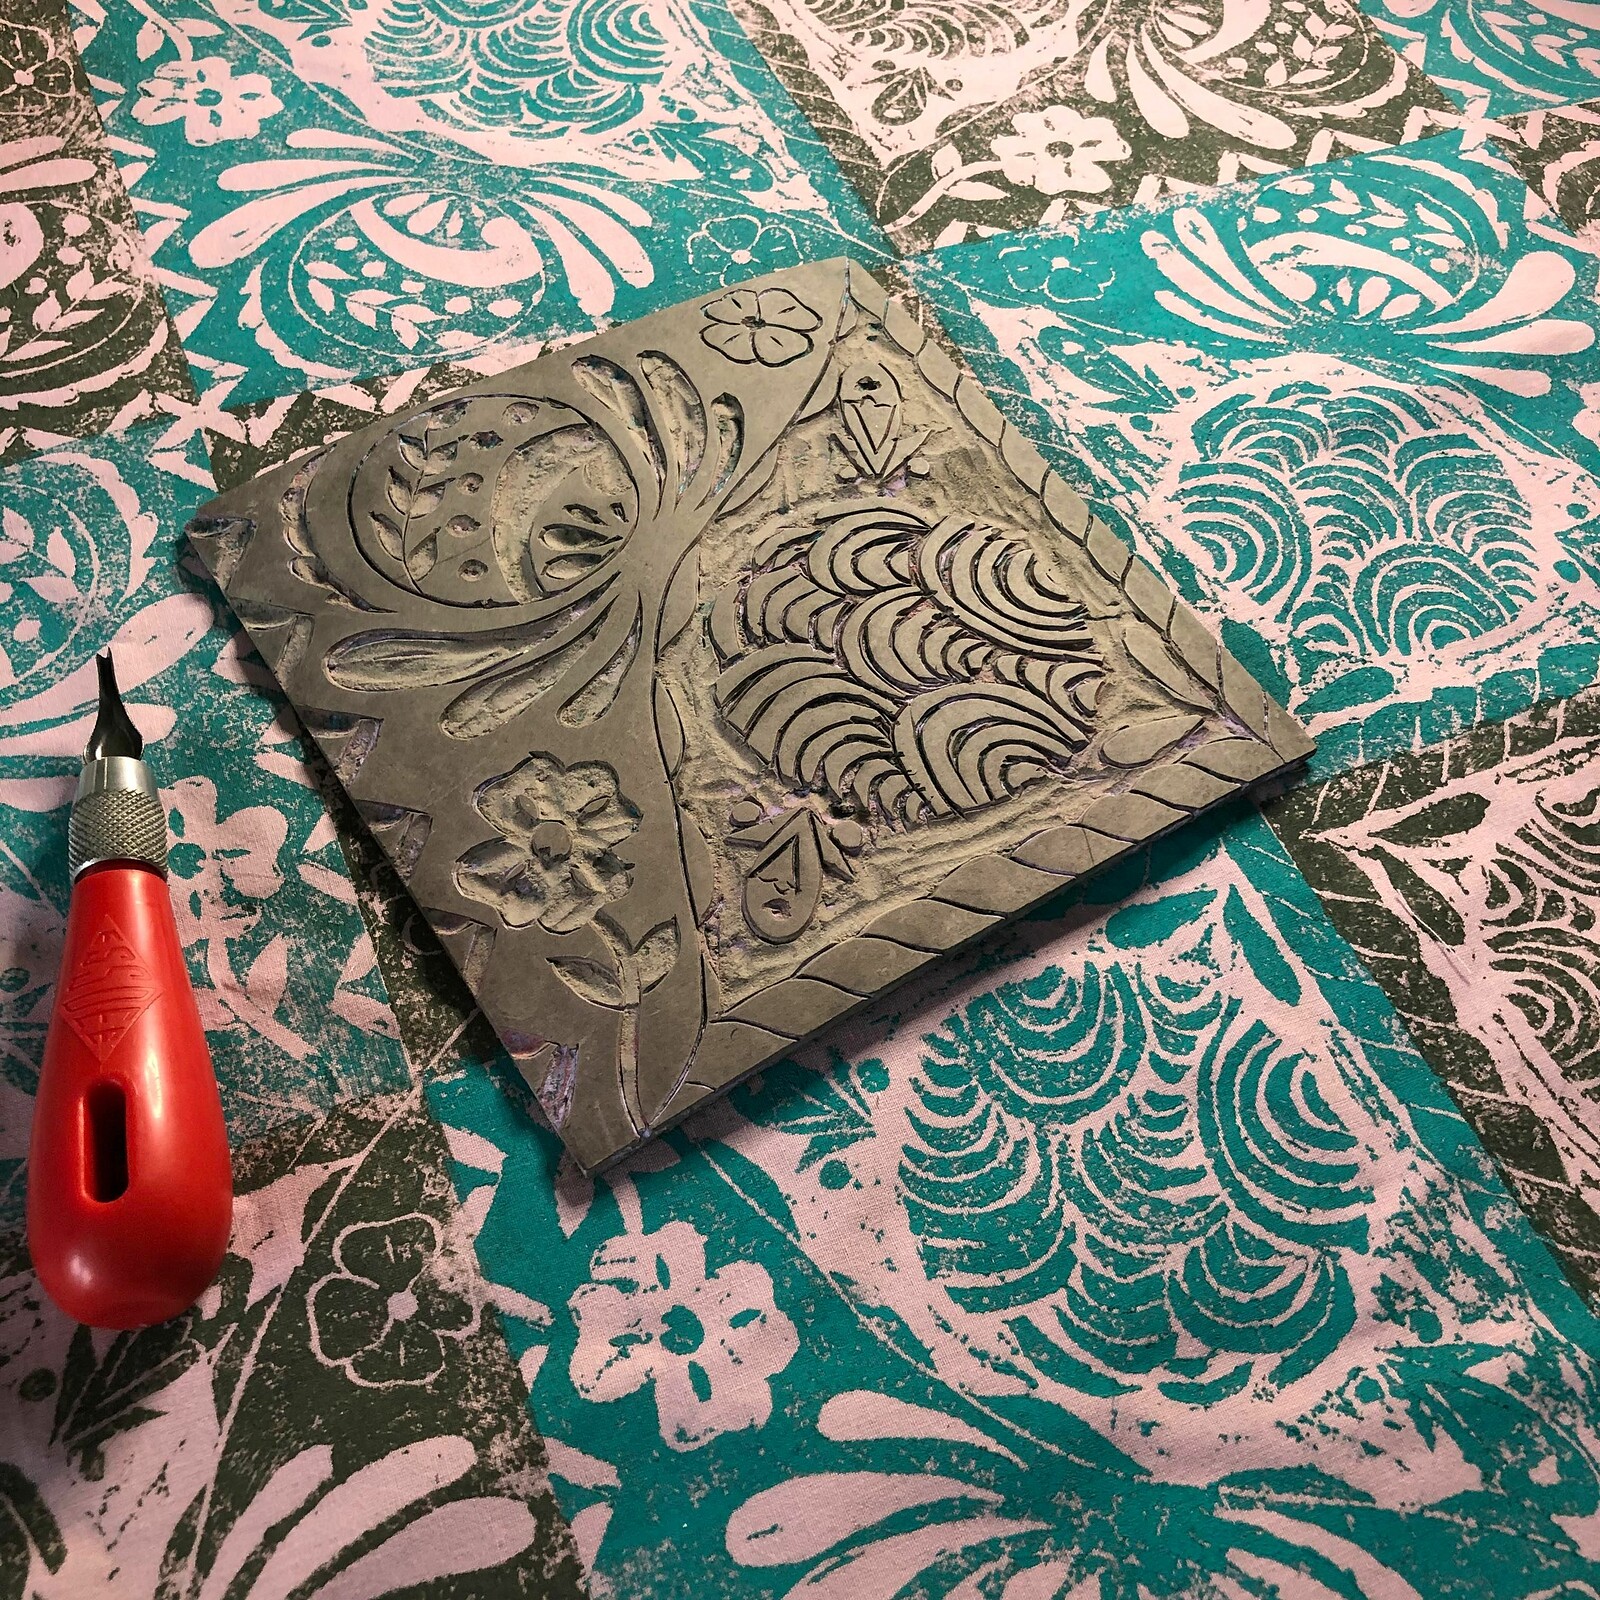 Discover Lino Printing on Fabric at Prior Shop